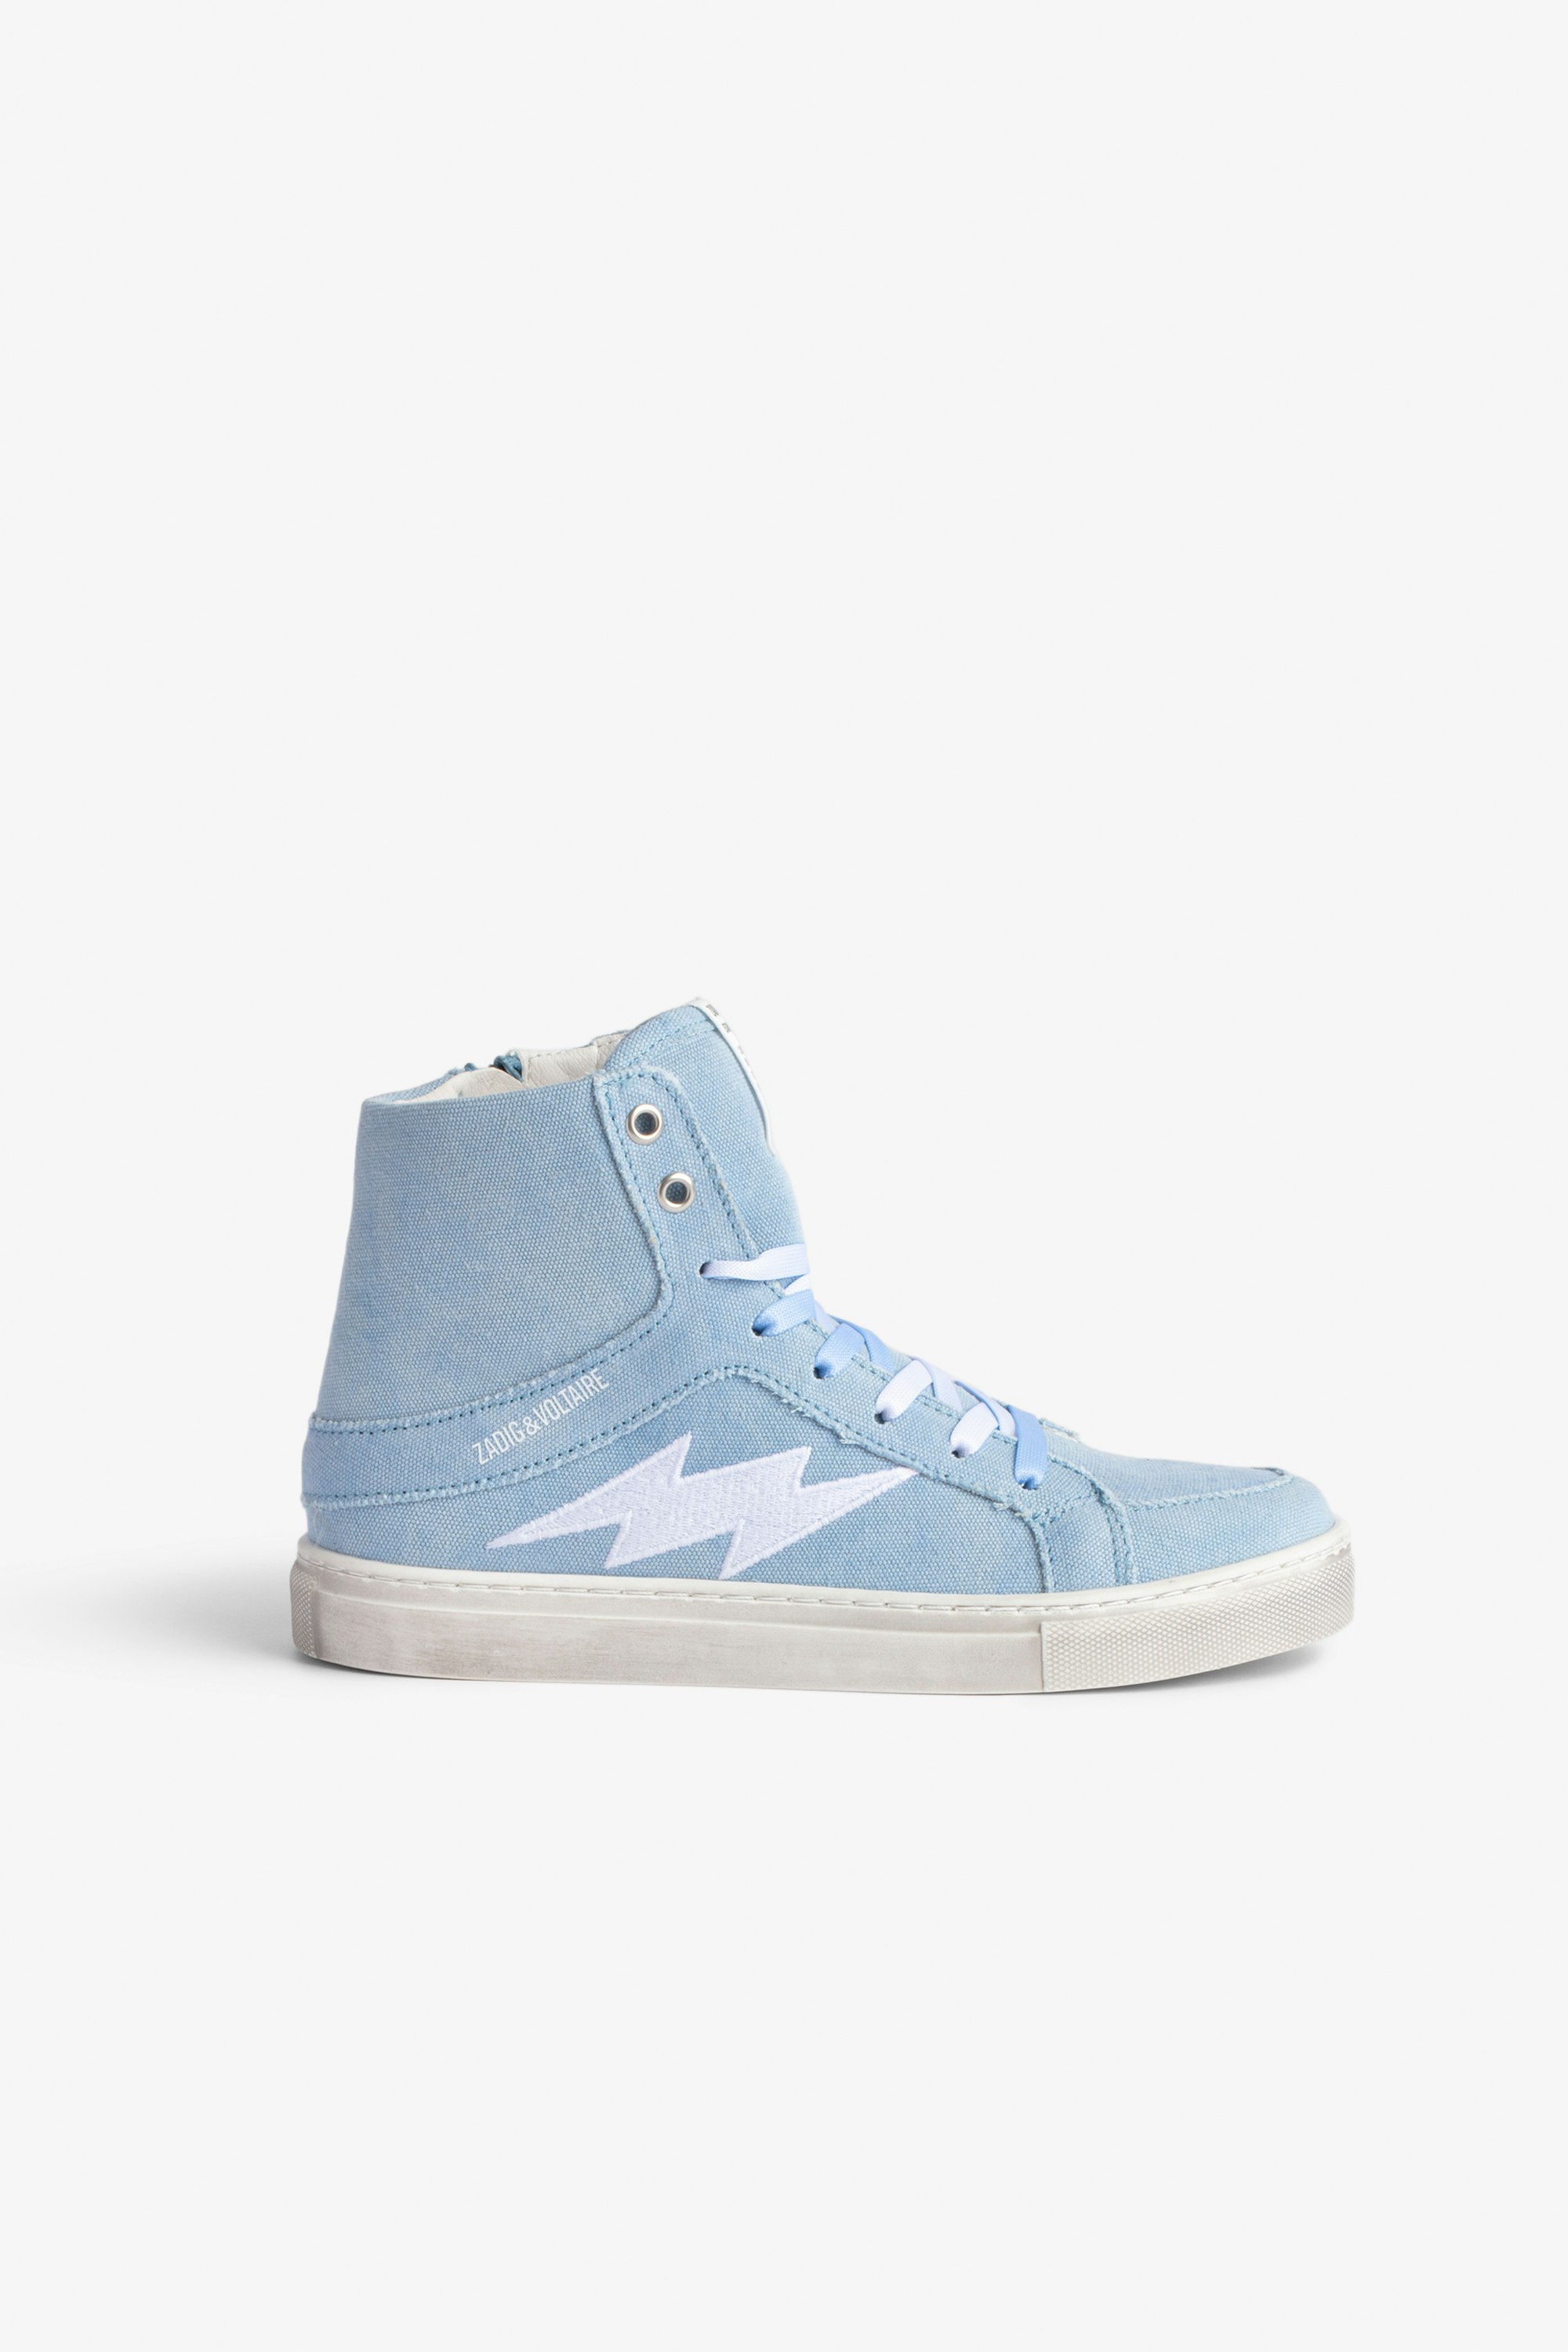 Kids' ZV1747 High Flash High-Top Trainers Kids’ high-top trainers in blue cotton canvas, featuring a flash and multicolour laces